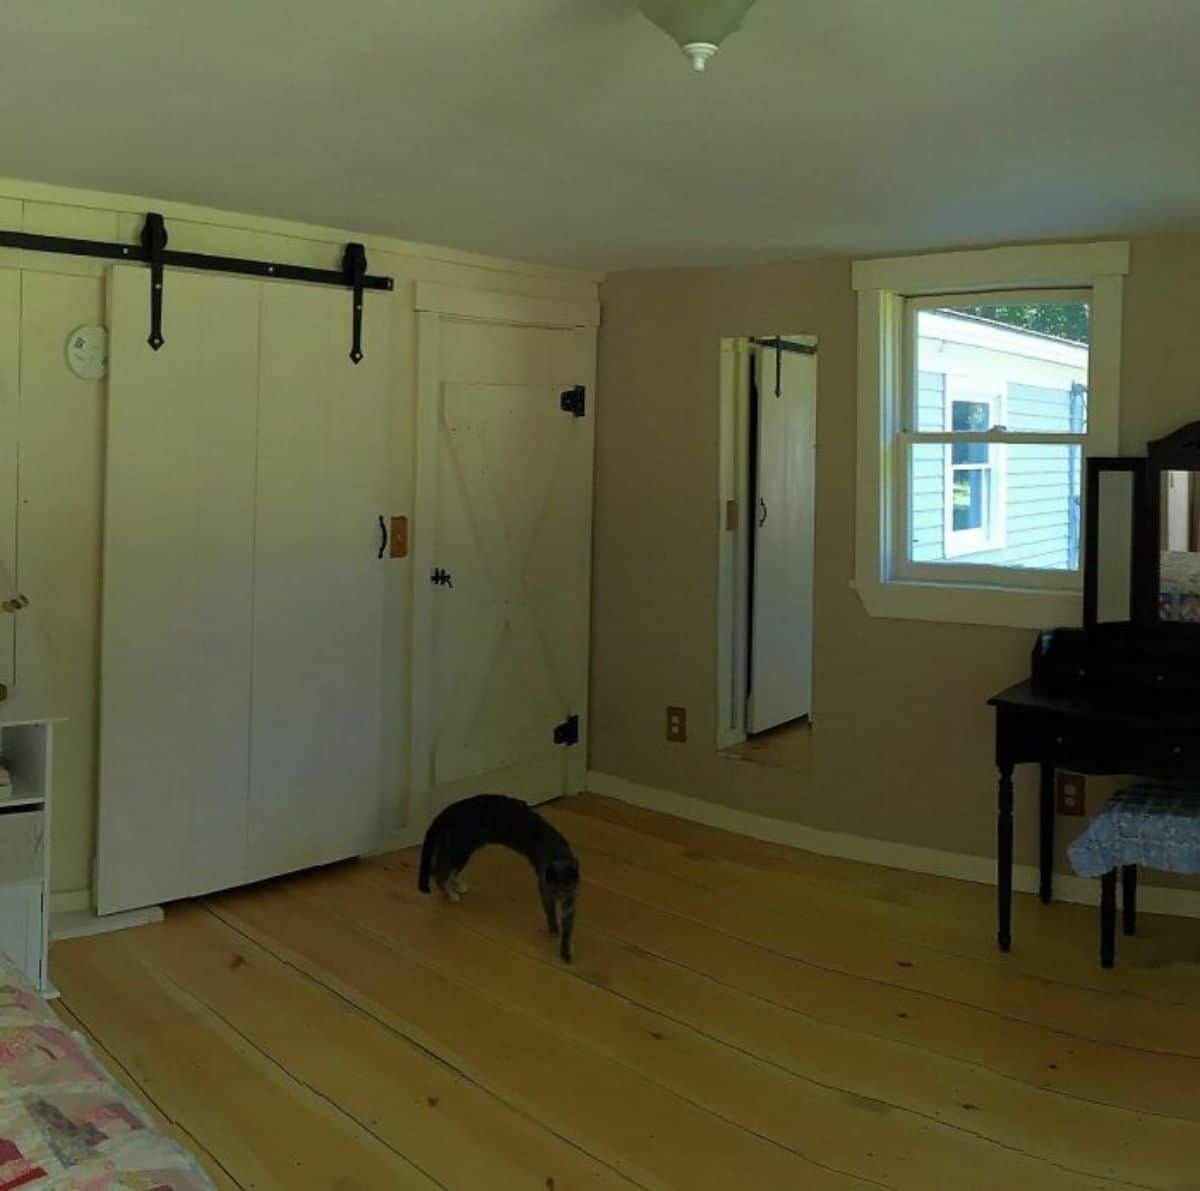 panoramic fail of black cat with a long curved body